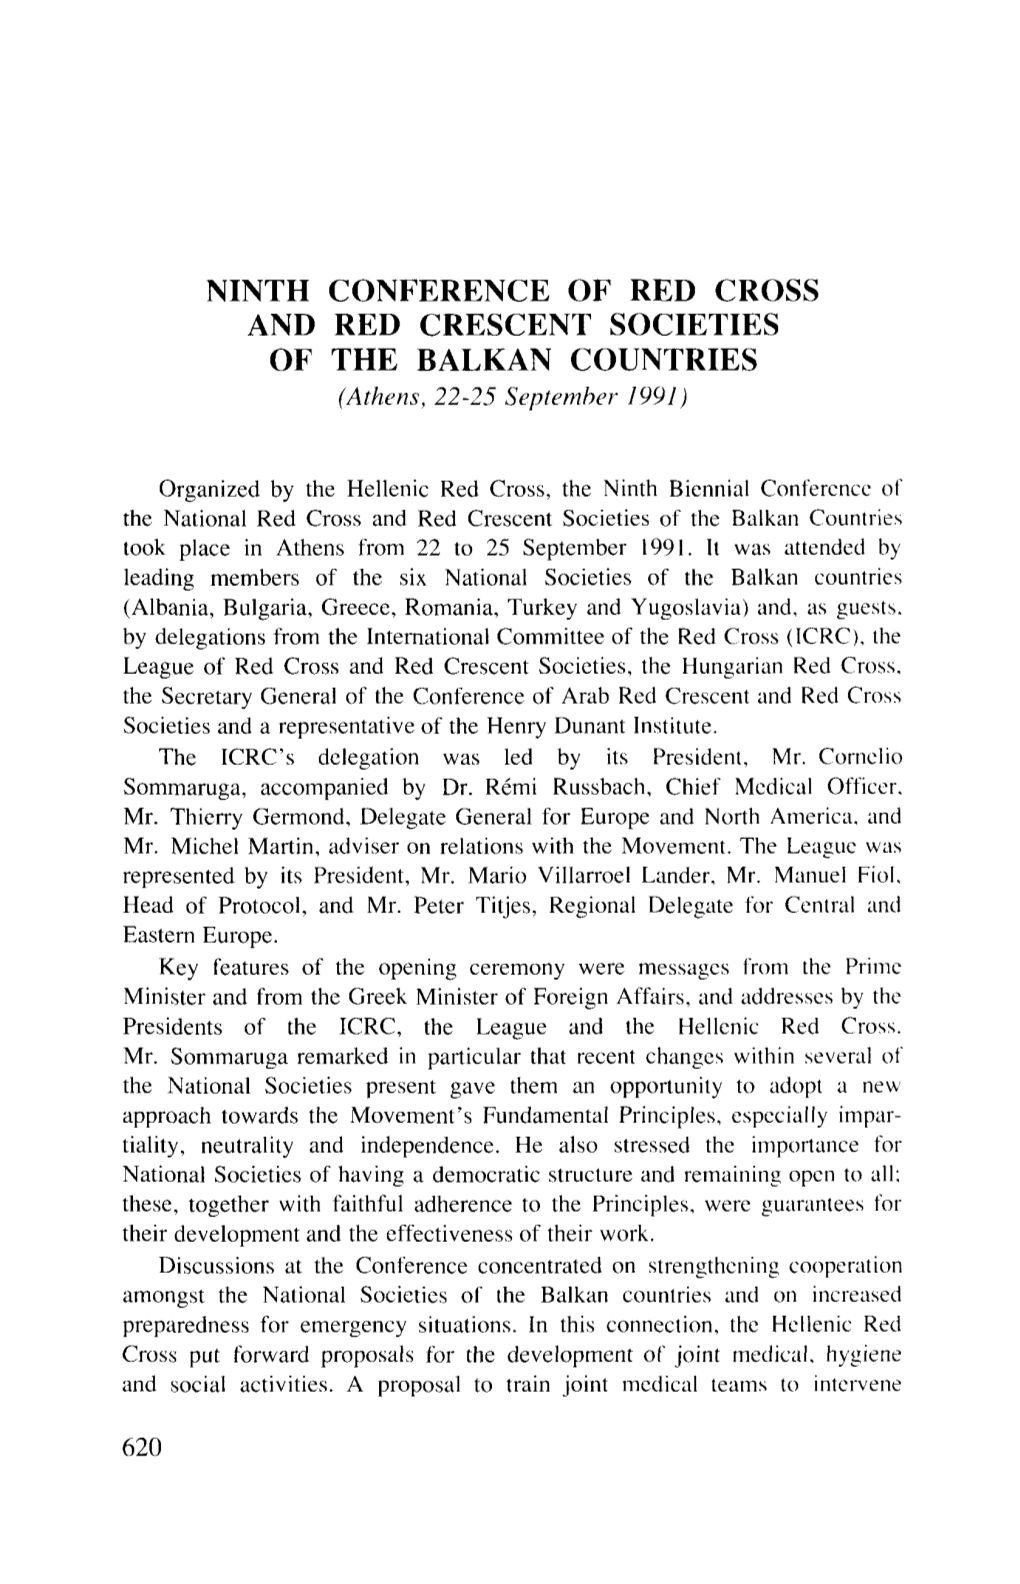 NINTH CONFERENCE of RED CROSS and RED CRESCENT SOCIETIES of the BALKAN COUNTRIES (Athens, 22-25 September 1991)